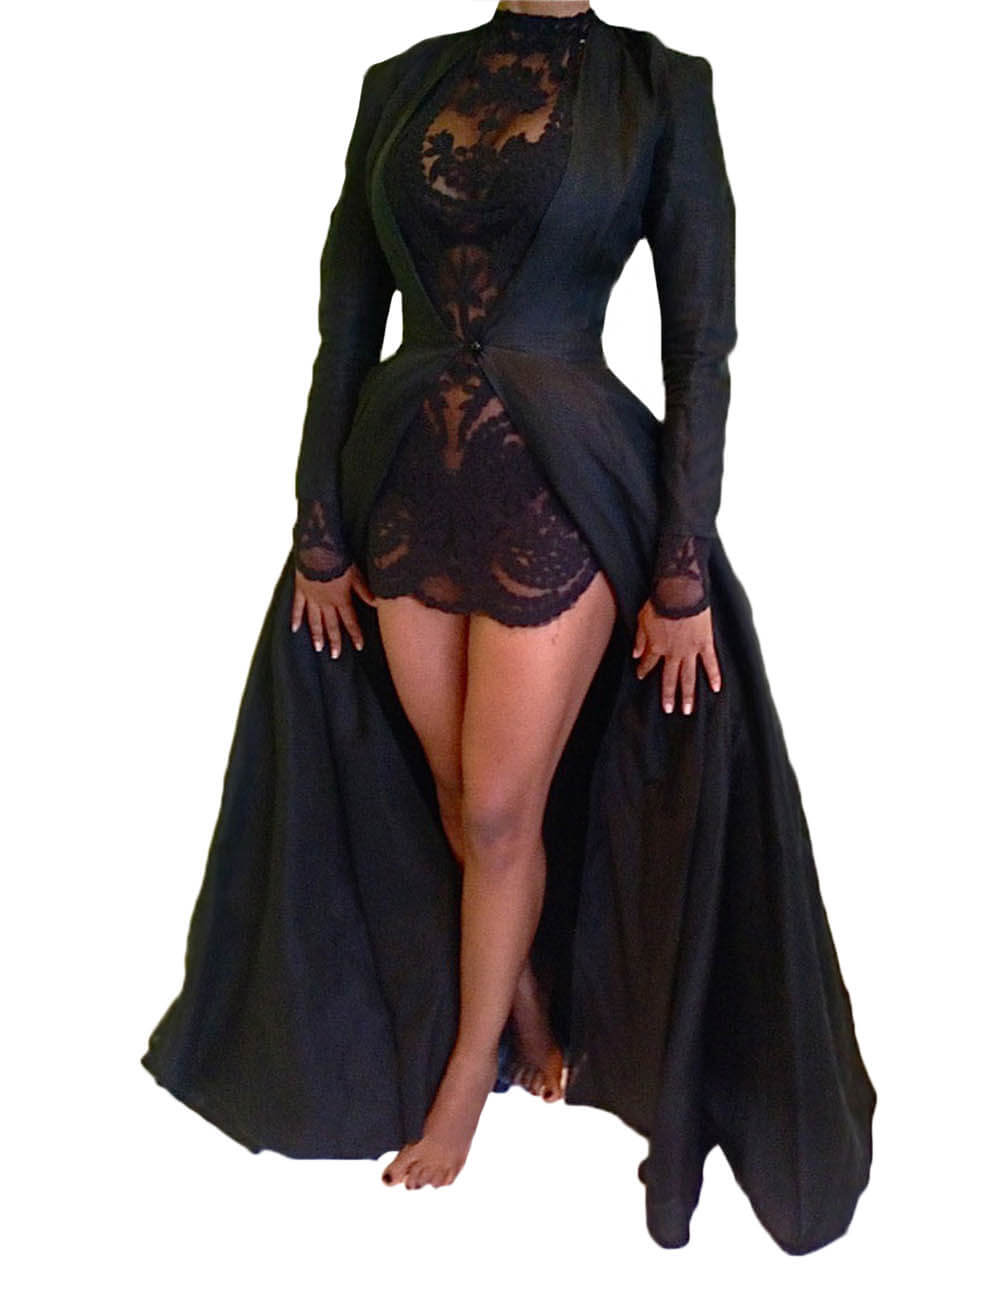  Women's Sexy 2Pcs Gothic Lace Sheer Jacket Long Dress Gown Party Halloween Costume Outfit